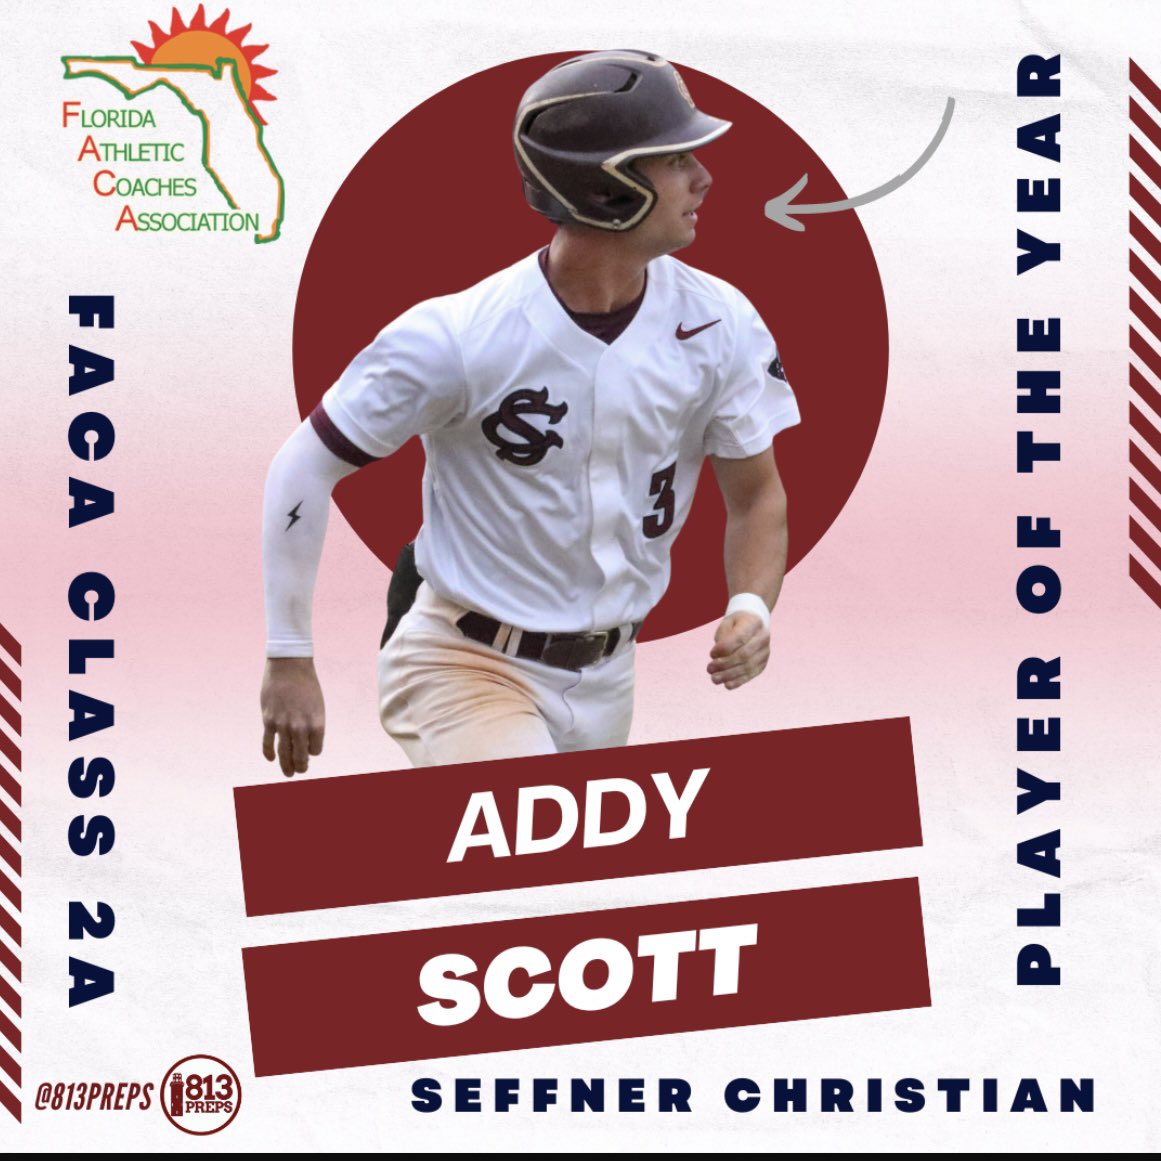 So proud of you!! Hard work has paid off. Excited for your future!!! @addyscott_ @rscott2152